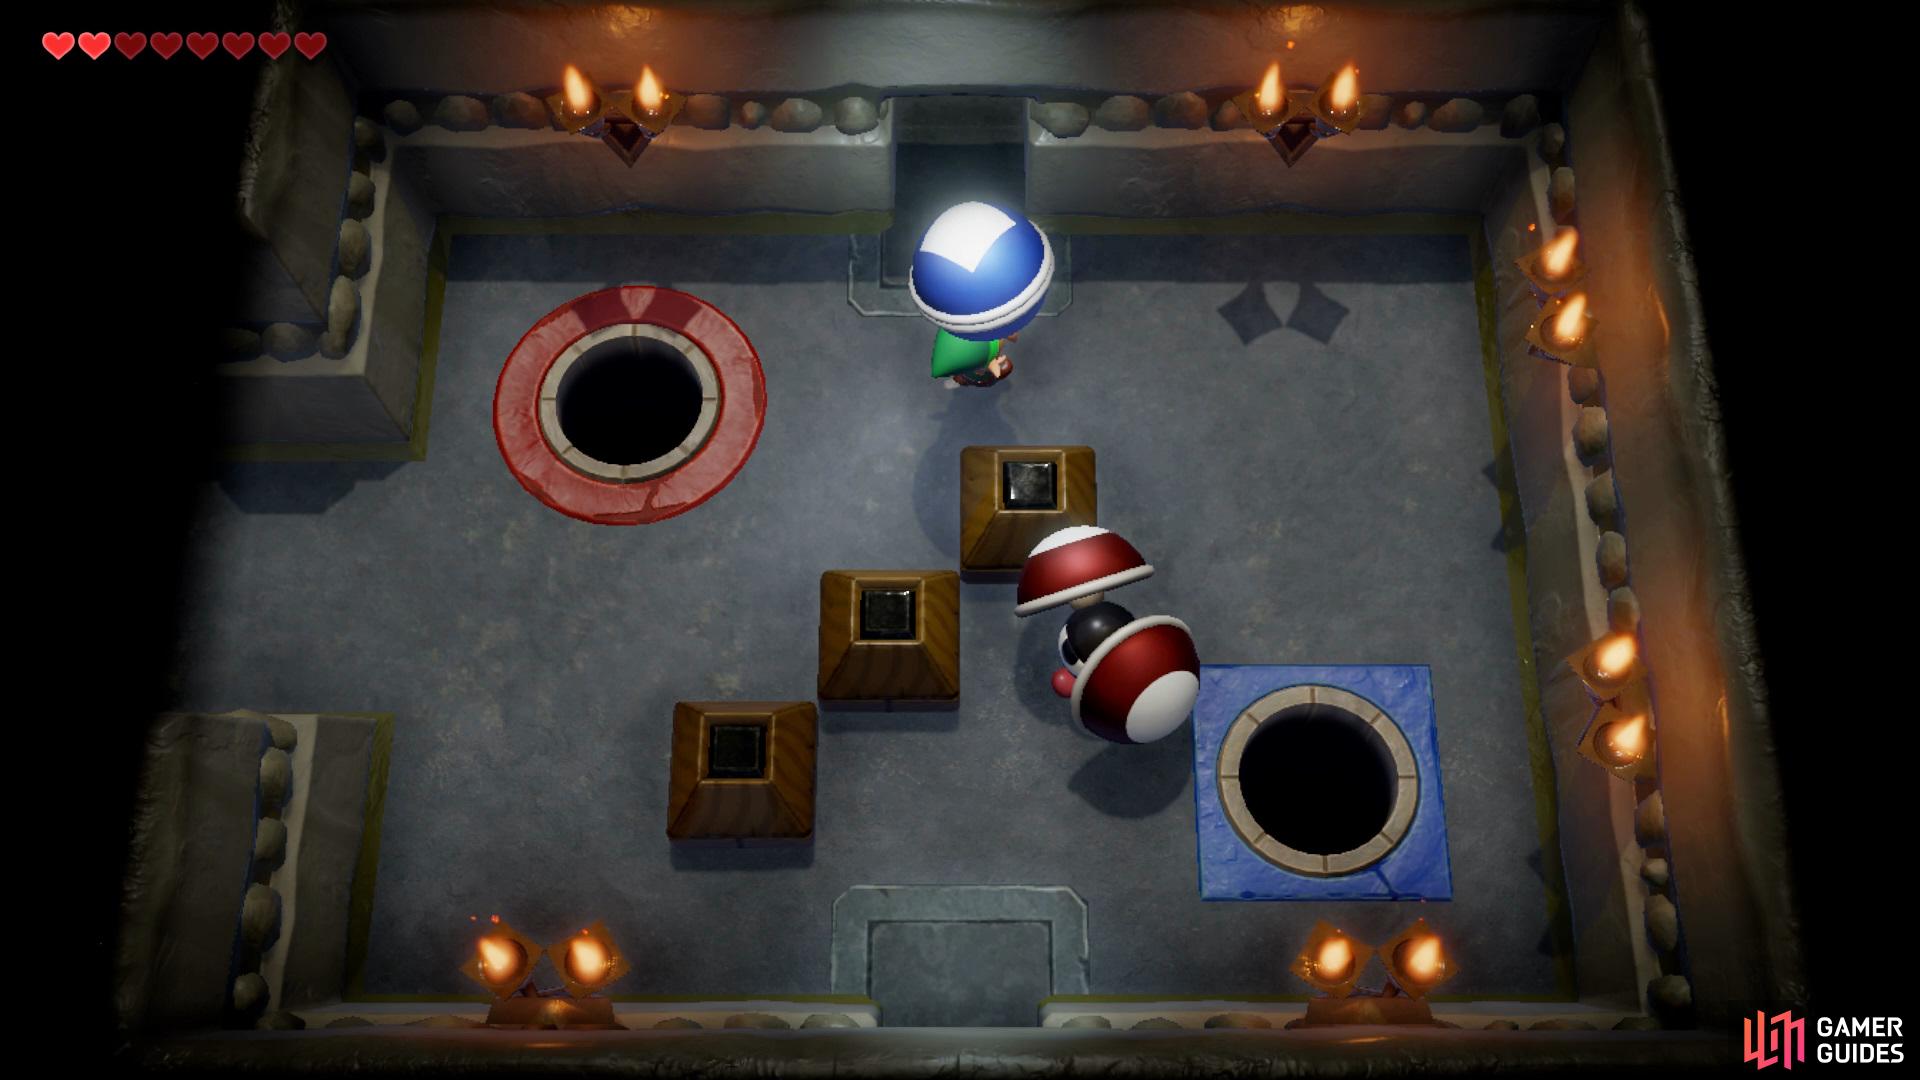 Pick the Orb Monsters up and throw them into the hole with the same color.